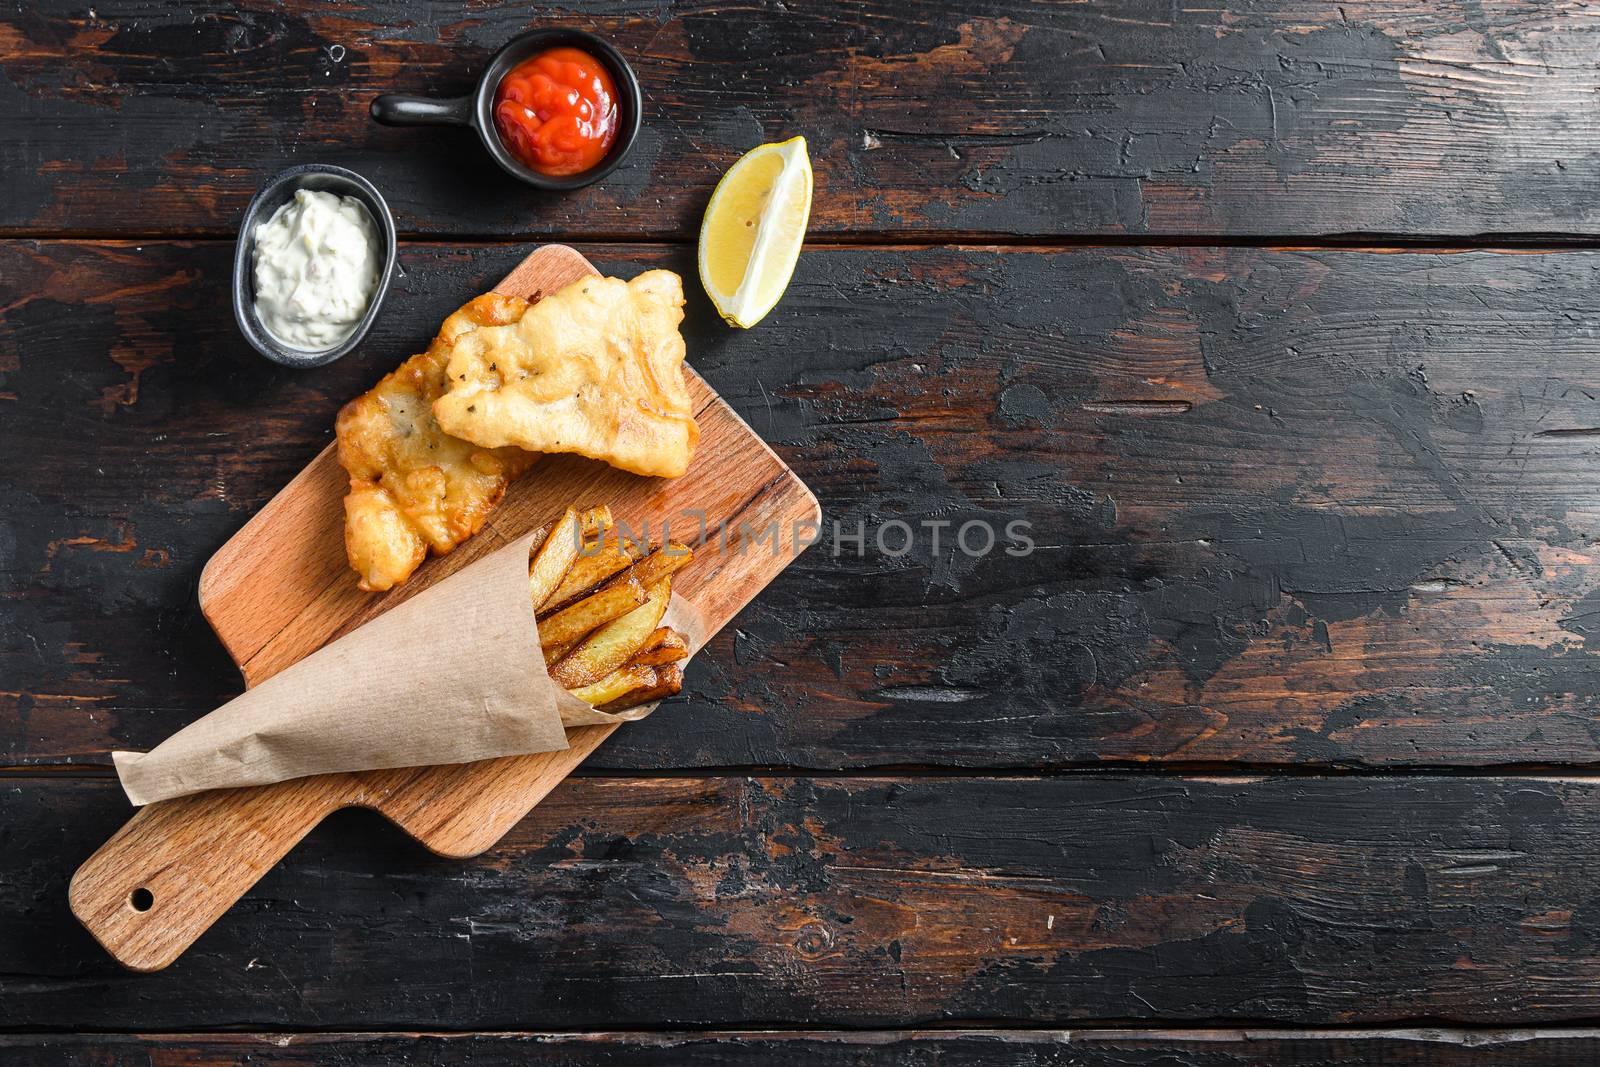 Fish and chips in a paper cone on wood chopping board dip and lemon - fried cod, french fries, lemon slices, tartar sauce, ketchup tomatoe and with mushy peas served in the Pub or Restaurant over old wooden planks dark table top view space for text or recipe. by Ilianesolenyi